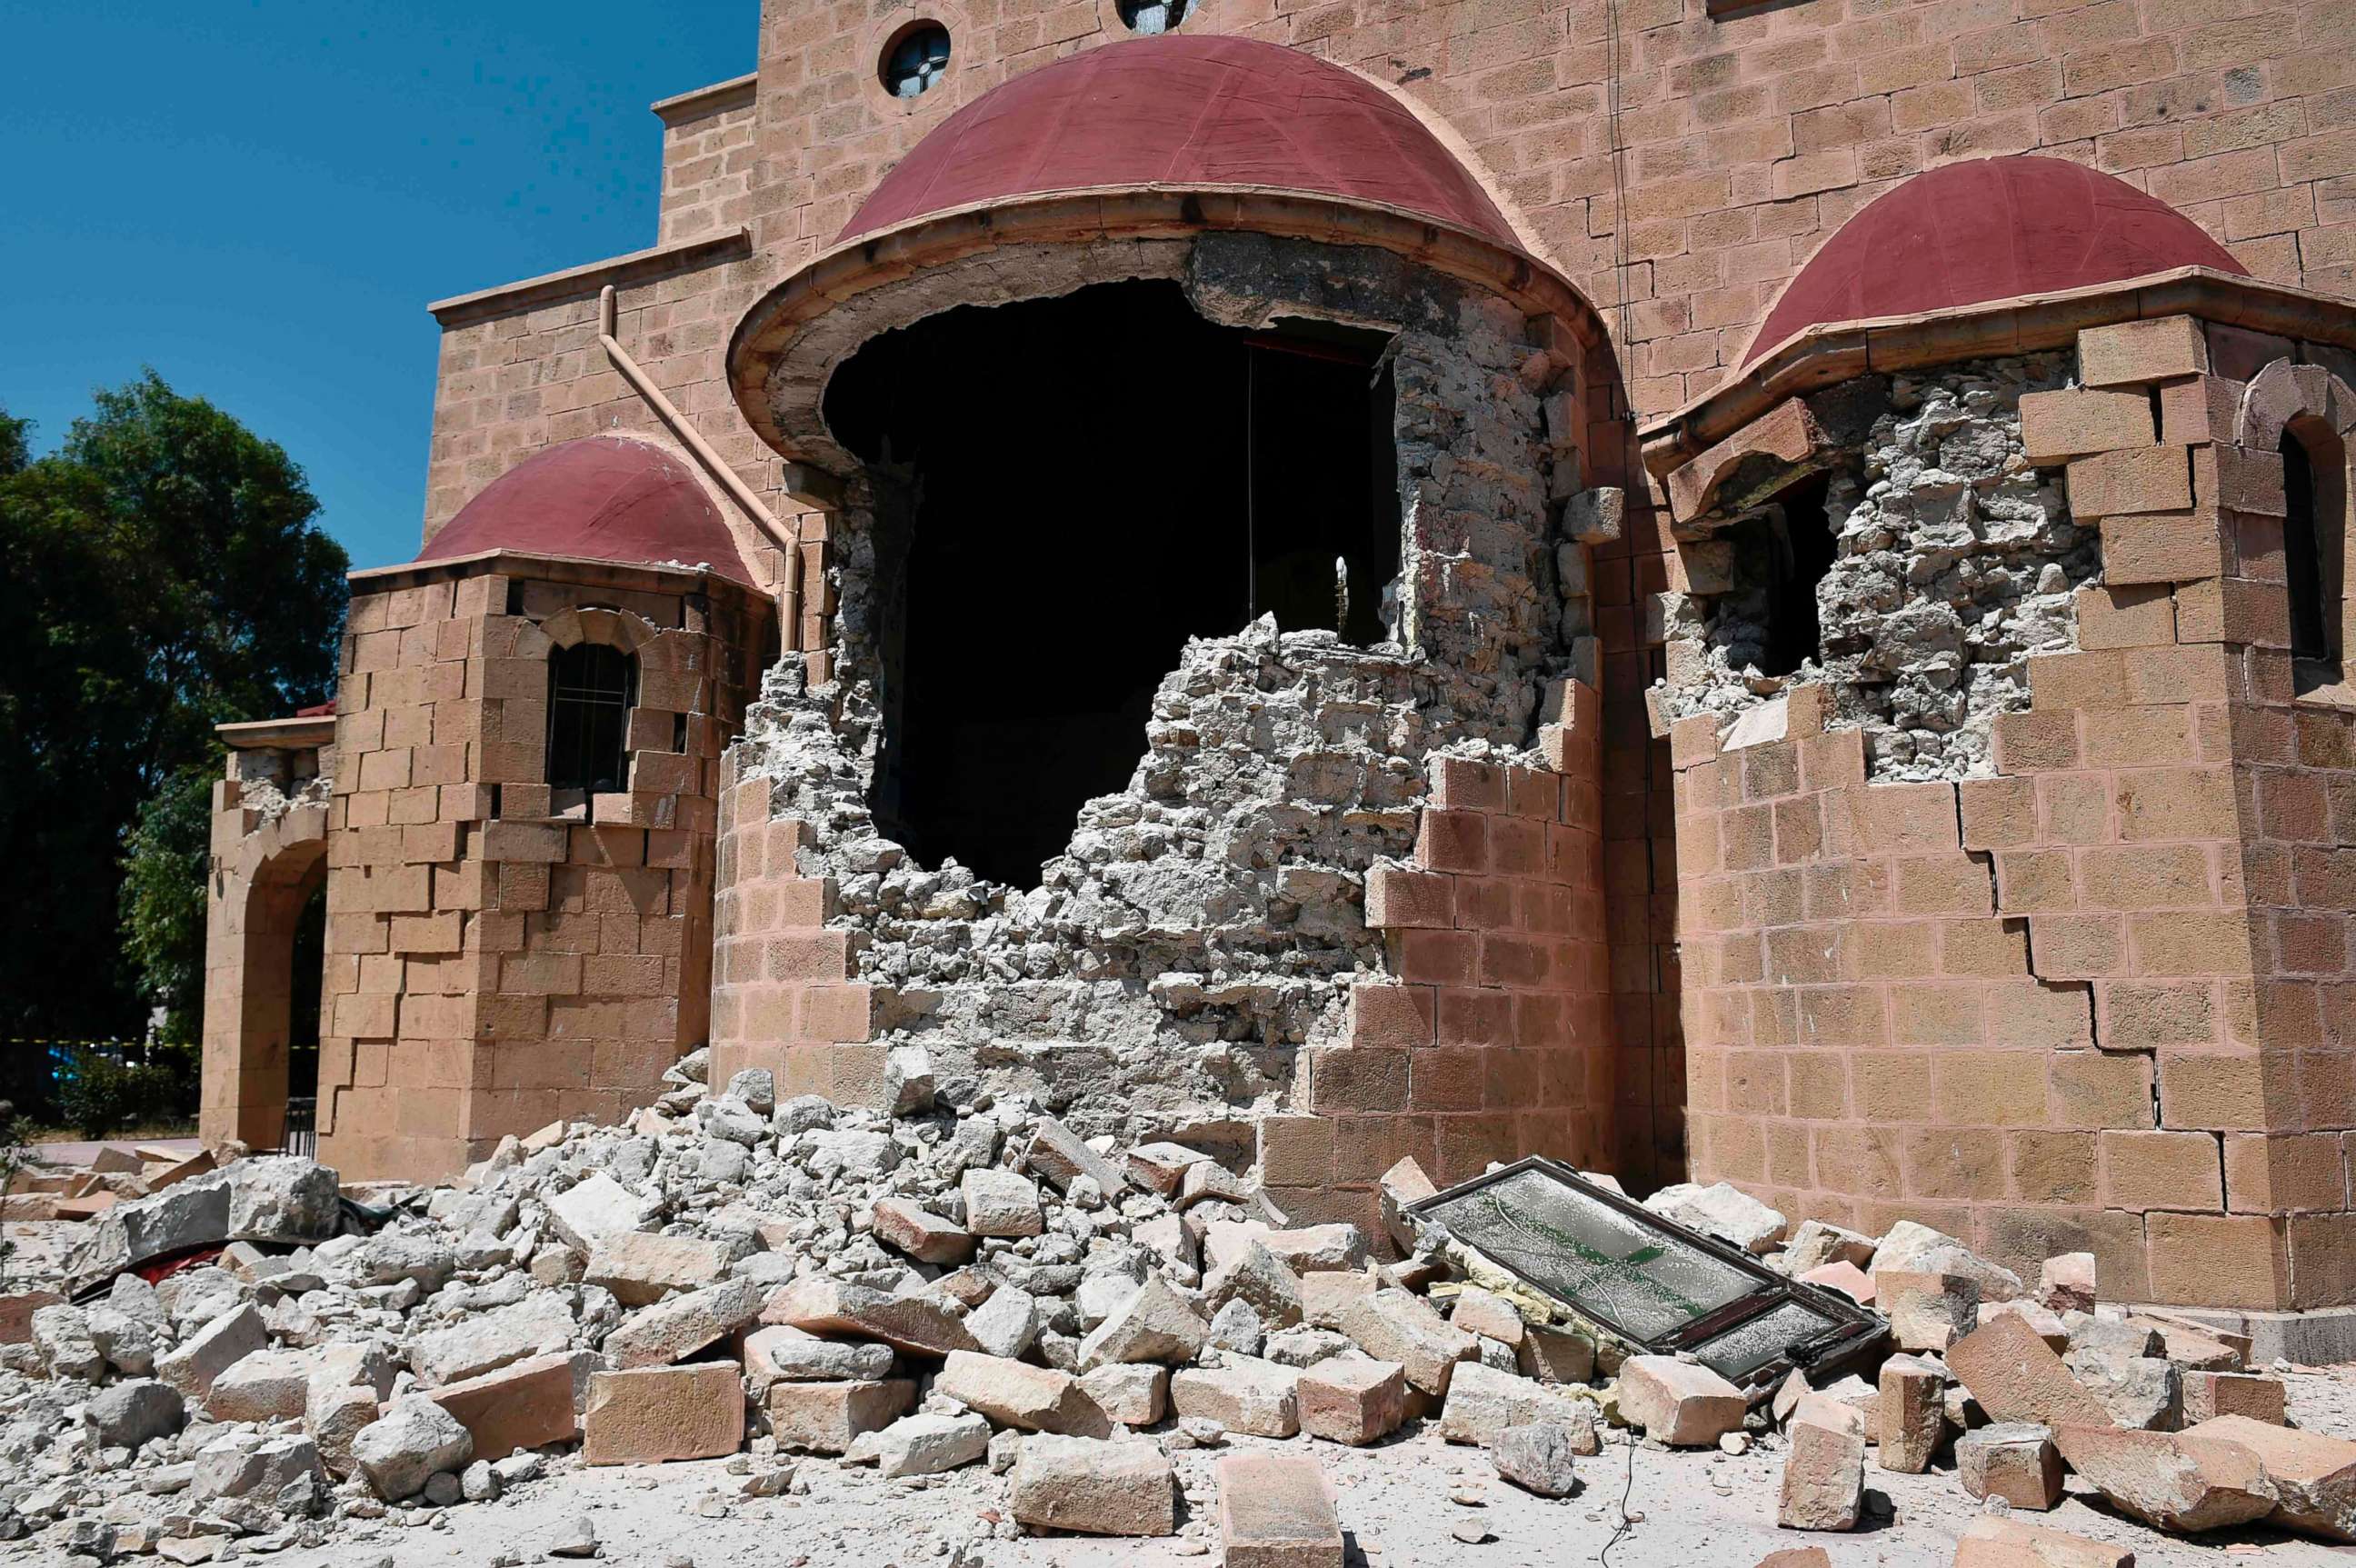 PHOTO: An exterior view of the quake-damaged Church of Saint Nicholas on the Greek Island of Kos following a 6.5 magnitude earthquake which struck the region, July 21, 2017. 
